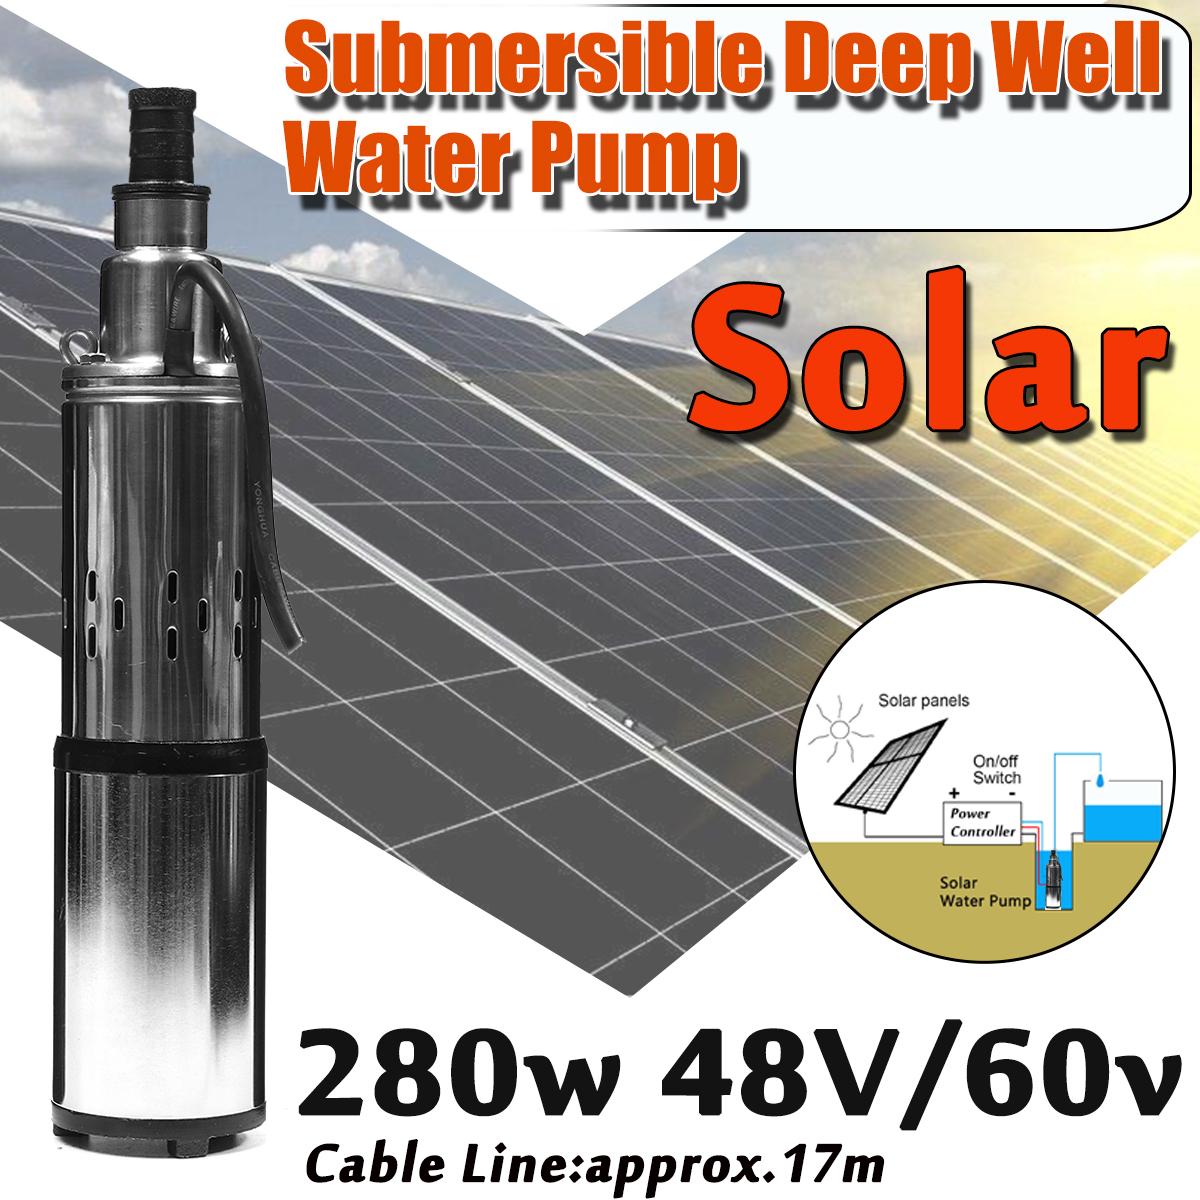 280W-48V60V-Stainless-Steel-Submersible-Solar-Water-Pump-Deep-Well-Cable-Garden-1424152-1